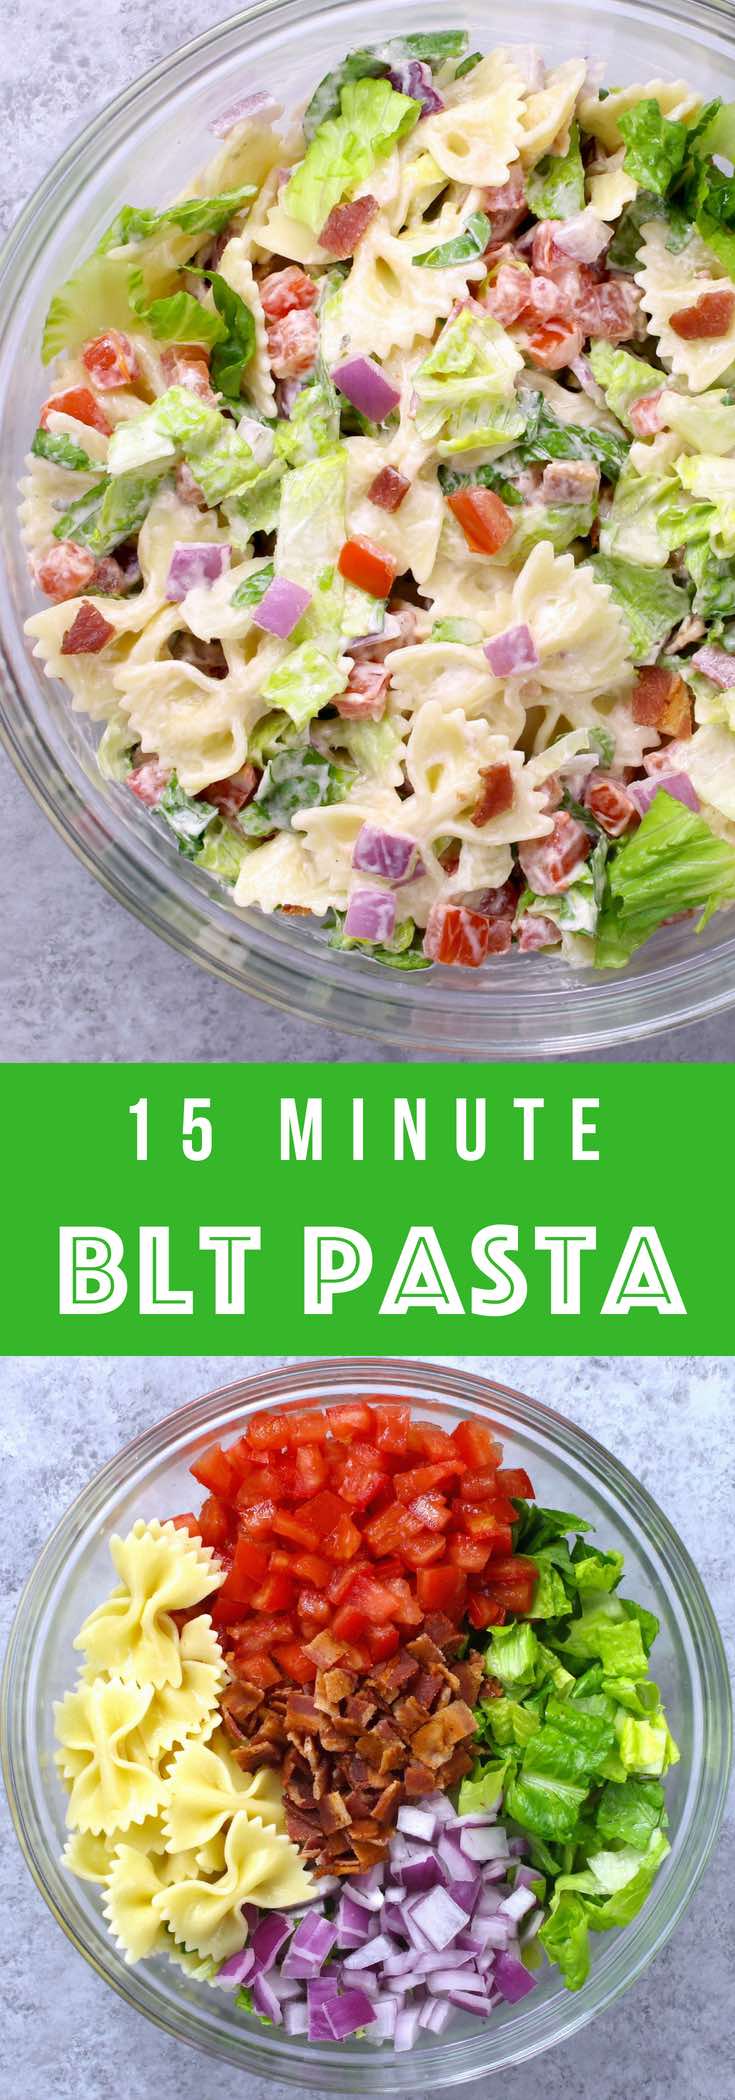 This BLT Pasta Salad is a refreshing and colorful salad and perfect for summertime BBQ or party! It’s one of the easiest pasta recipes and will be on your dinner table in 15 minutes. Your family and friends will ask for it again and again! #BLTPasta